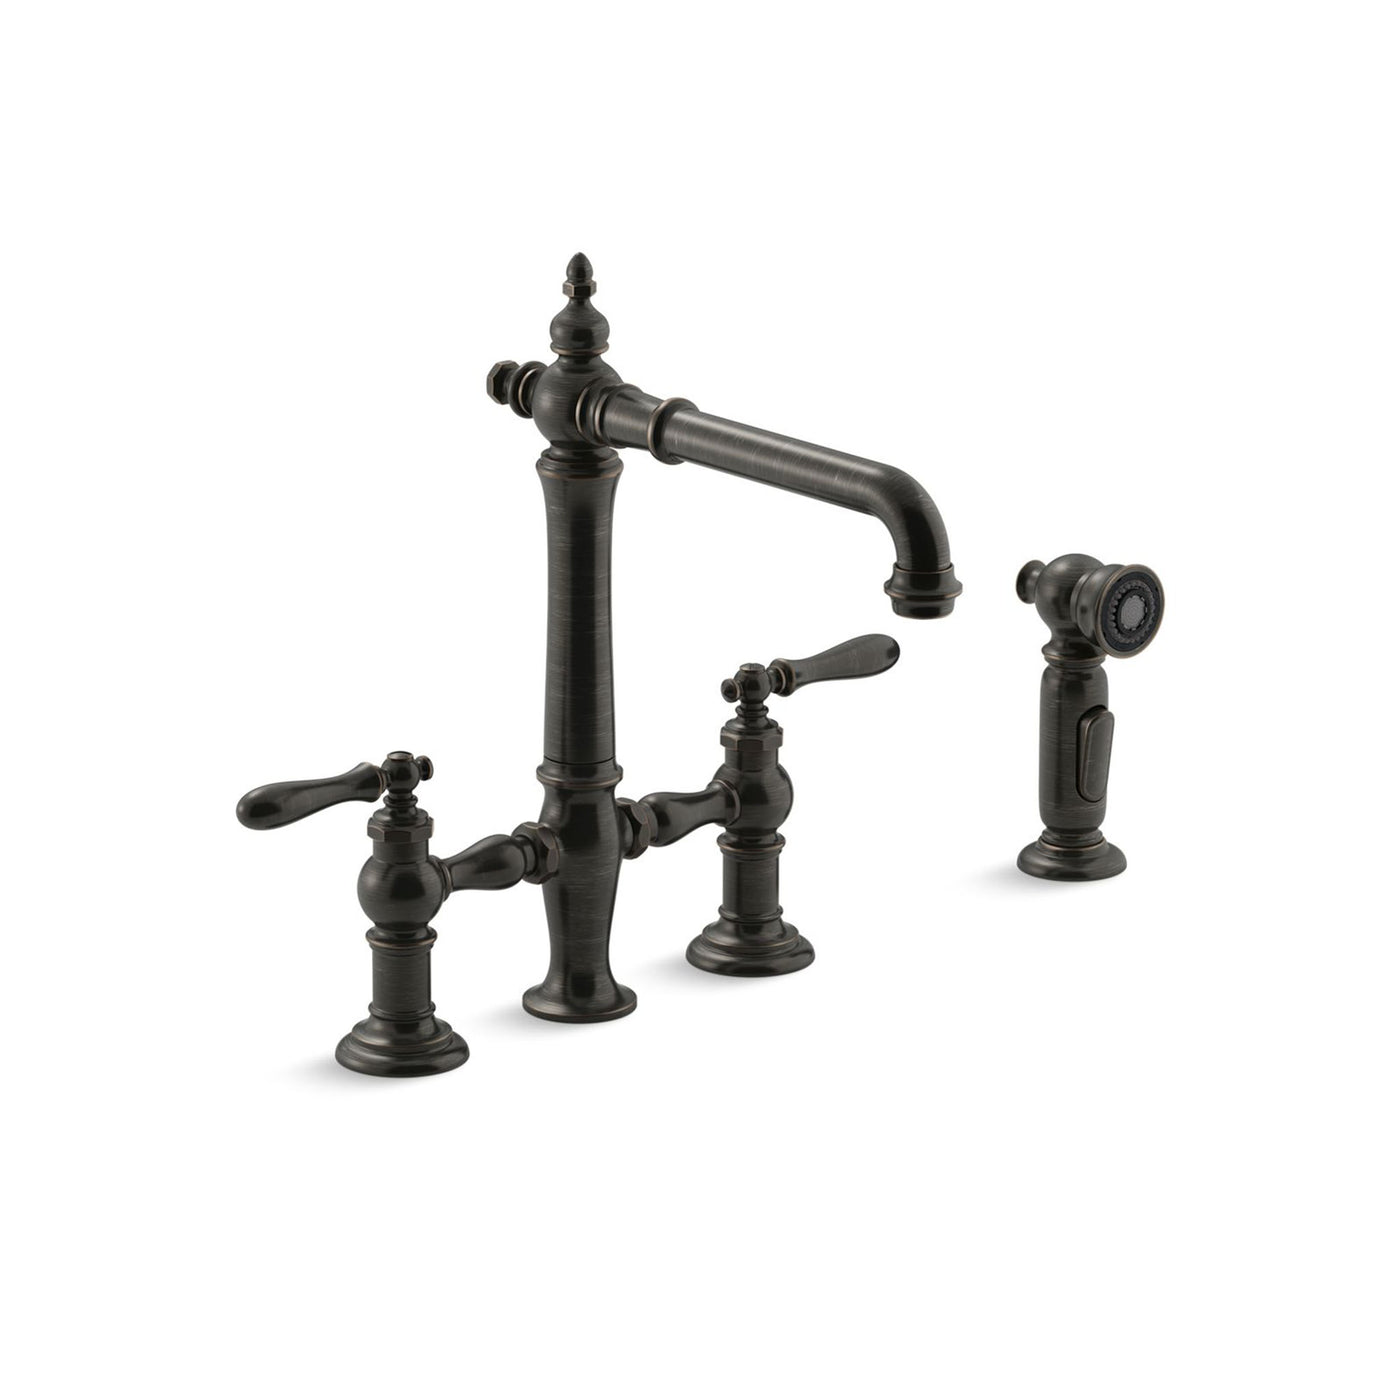 Artifacts® Two-hole bridge kitchen sink faucet with sidesprayer